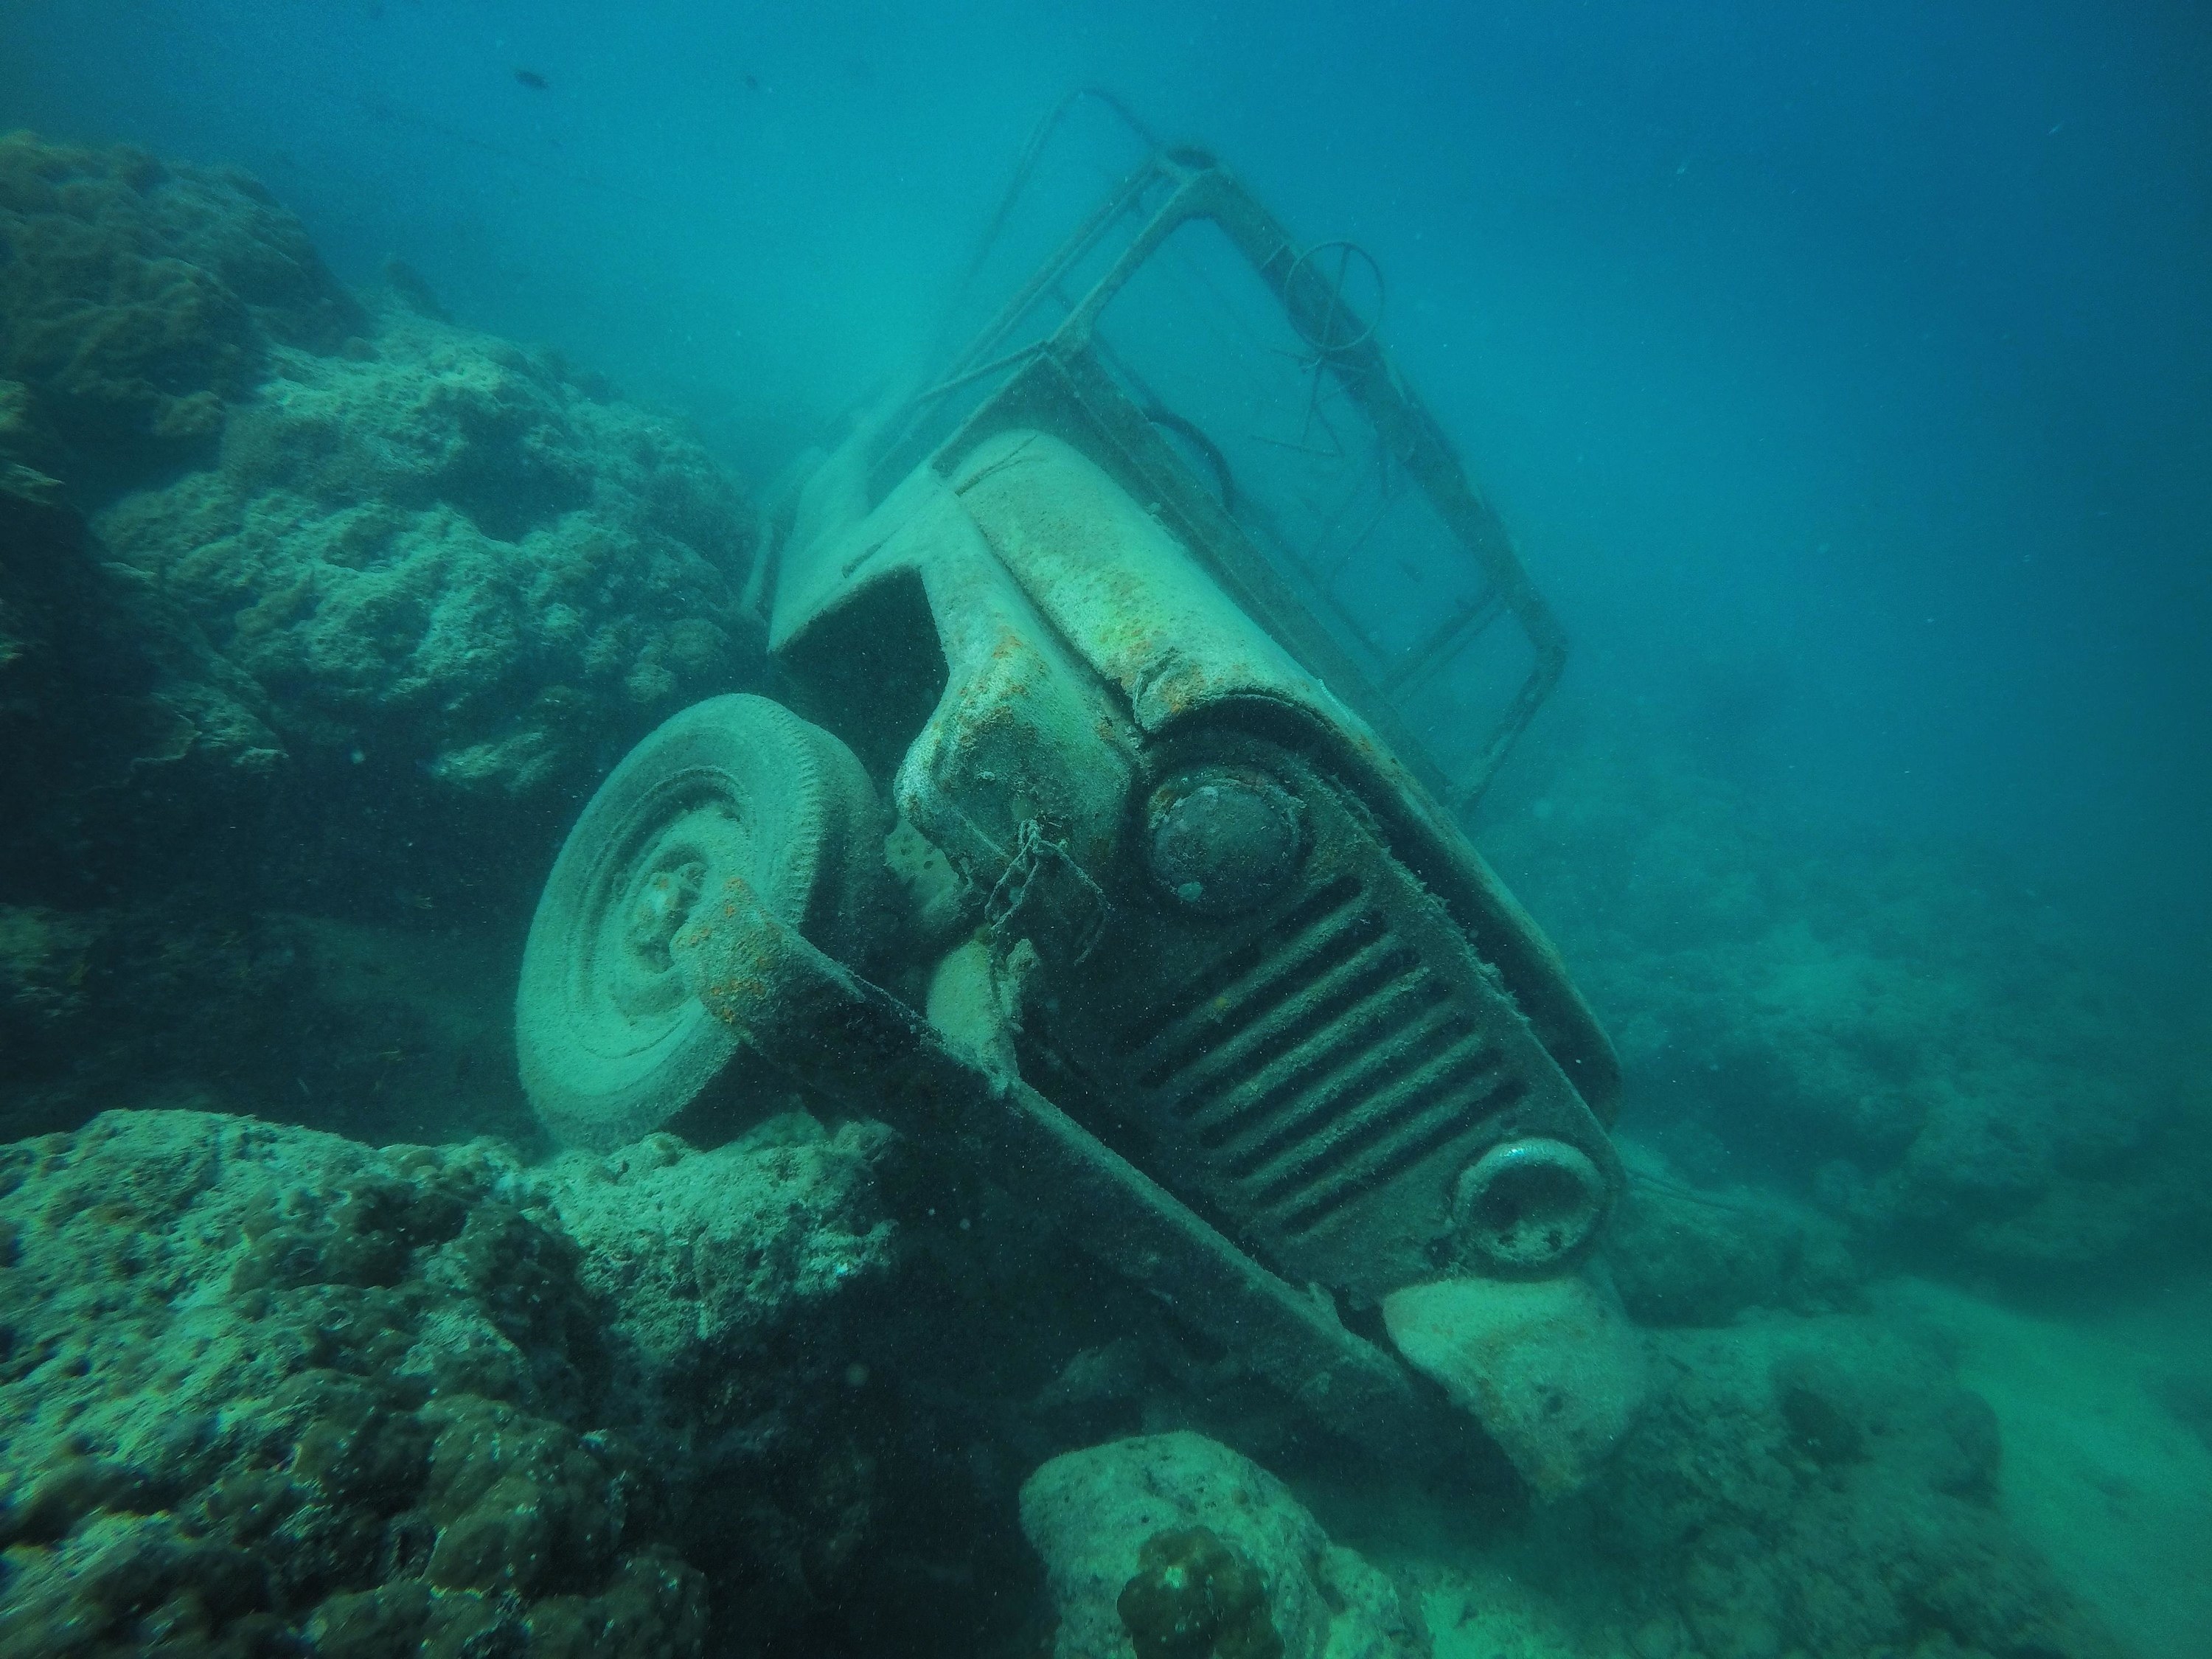 A rusted jeep resting on rocks at the bottom of the water